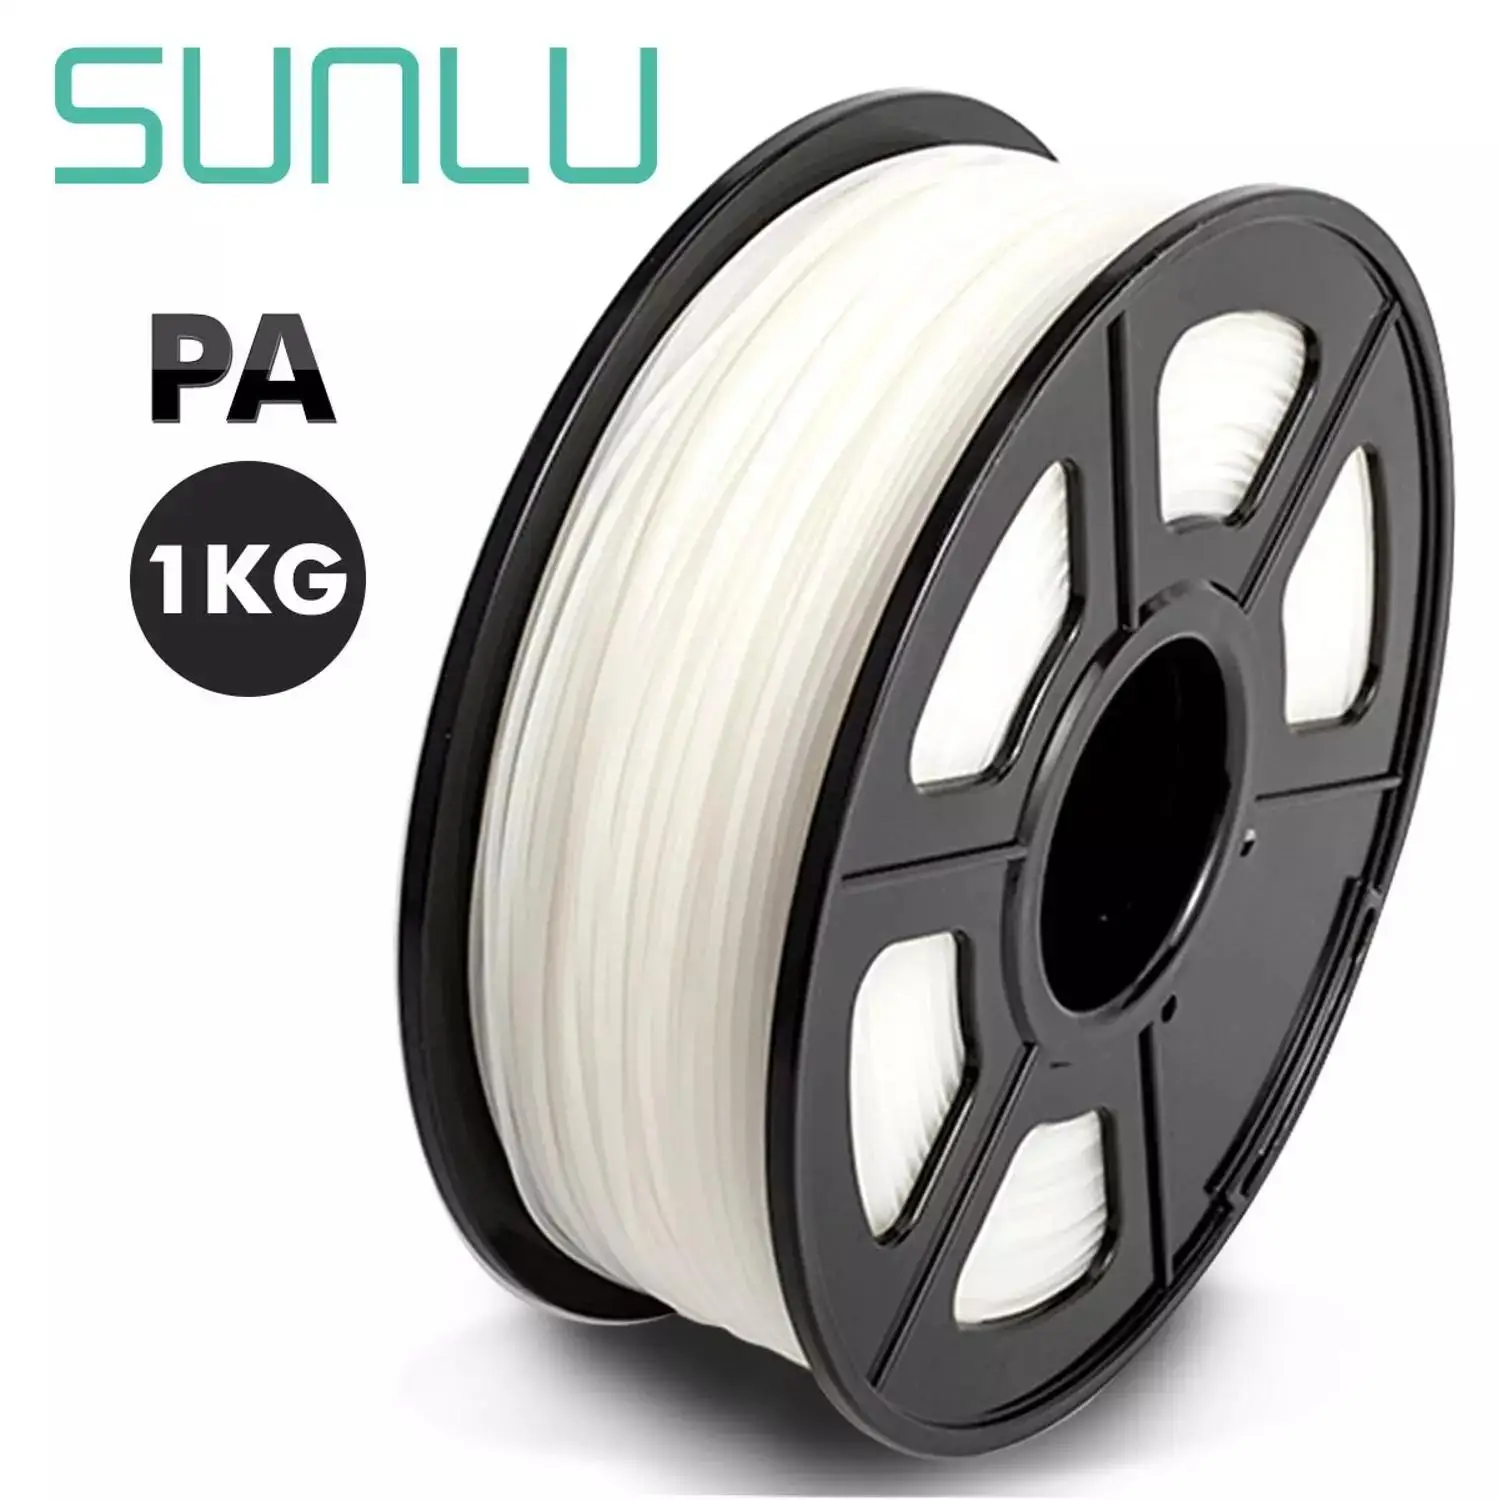 SUNLU 3D Printer Filament transparent PA Nylon filament 1.75mm 1KG/2.2LB with Spool in High Quality and No Bubbles loading=lazy